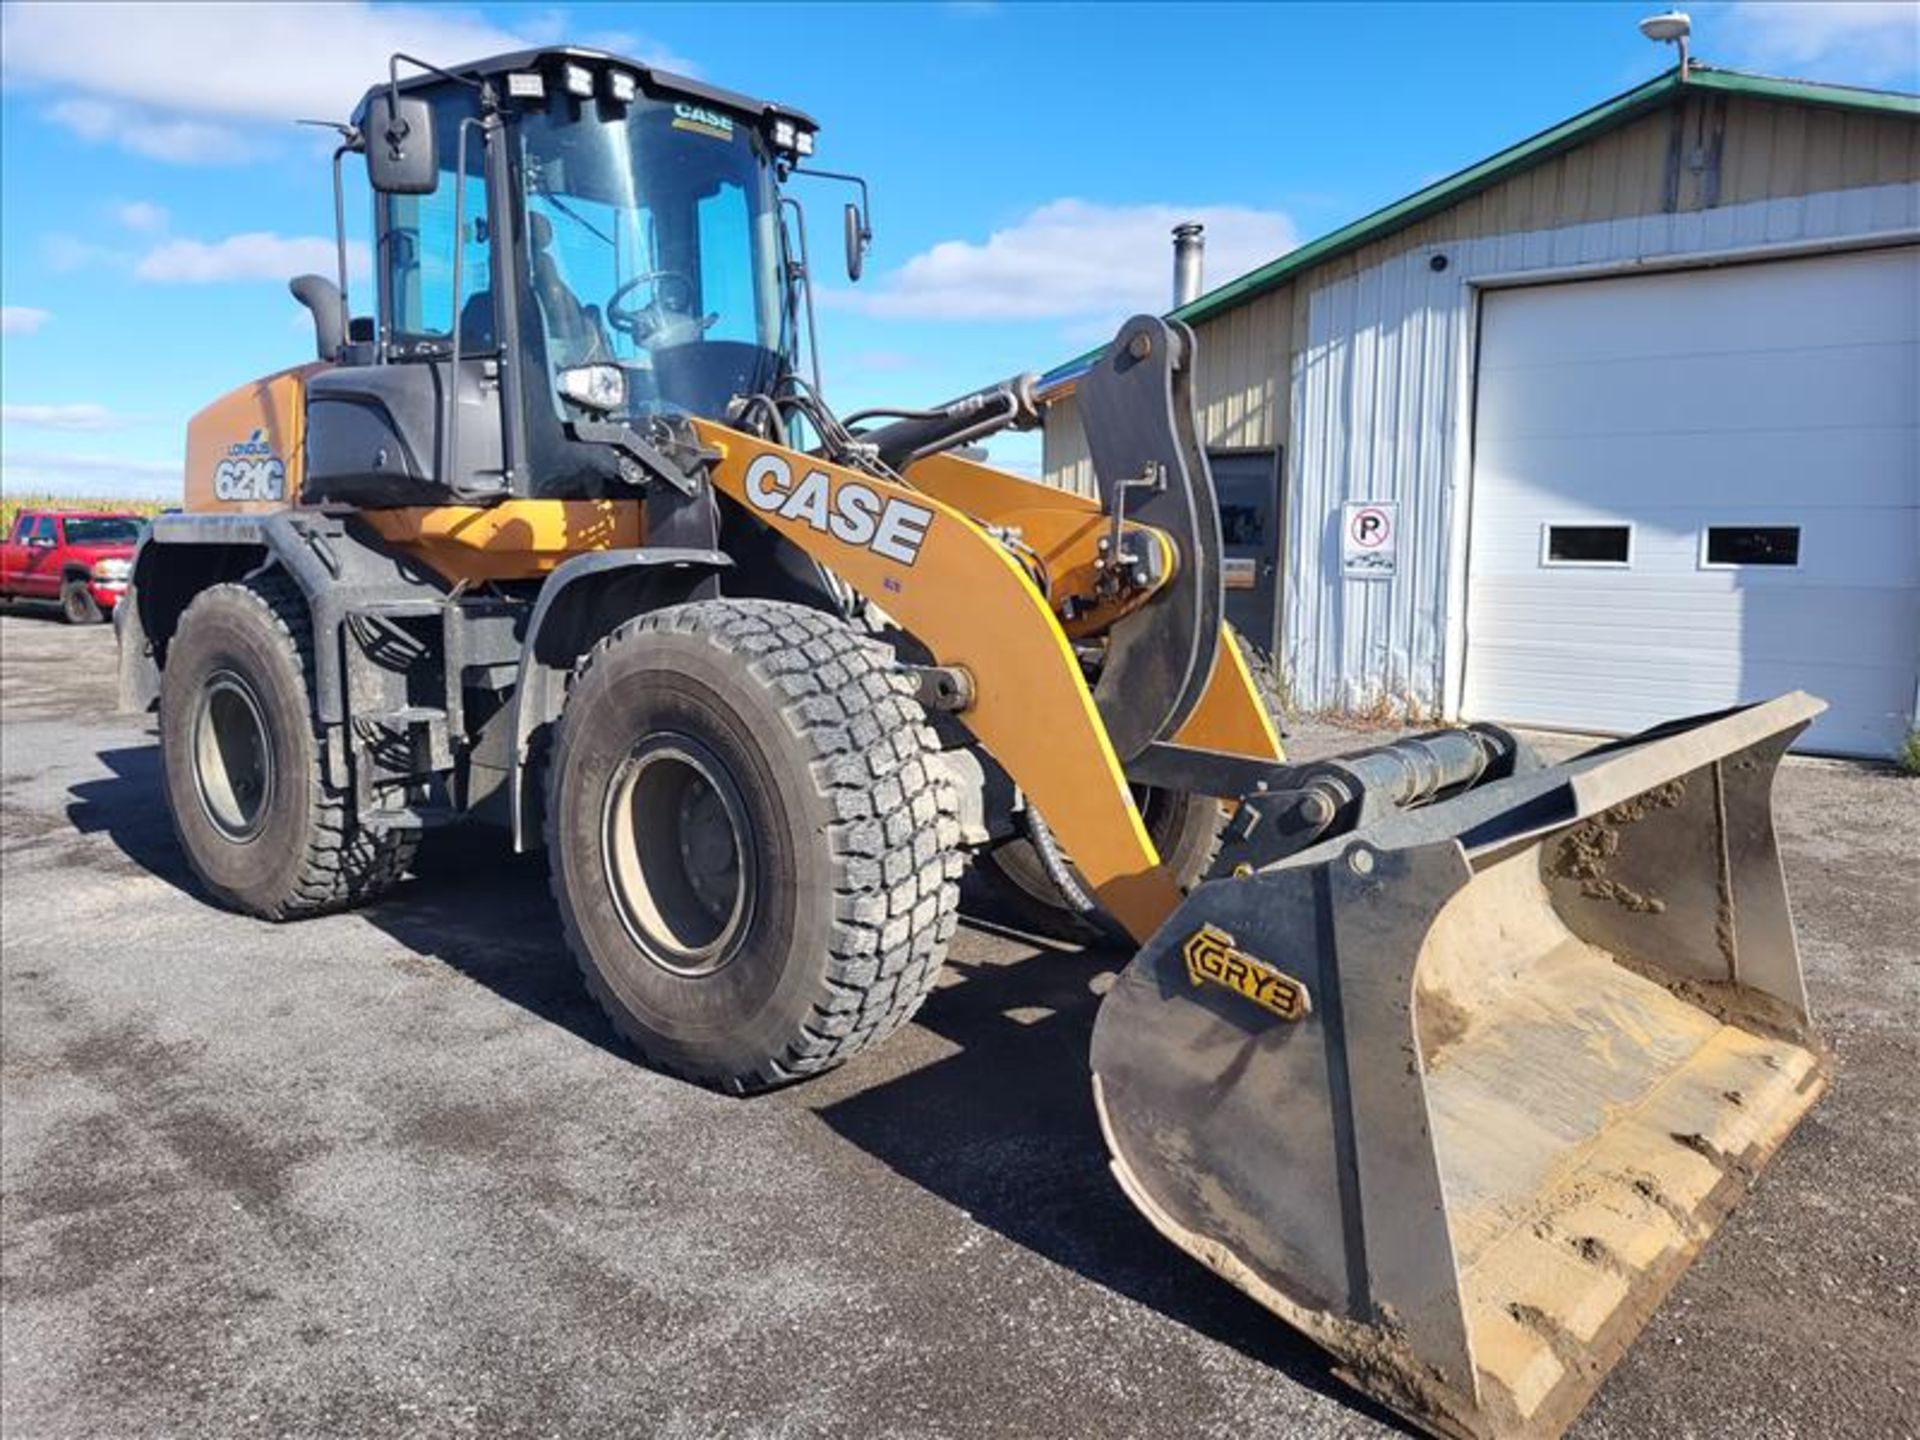 Case 621G Wheel Loader, enclosed cab, auxiliairy hydraulic system, GRYB Q/C, rearview camera,